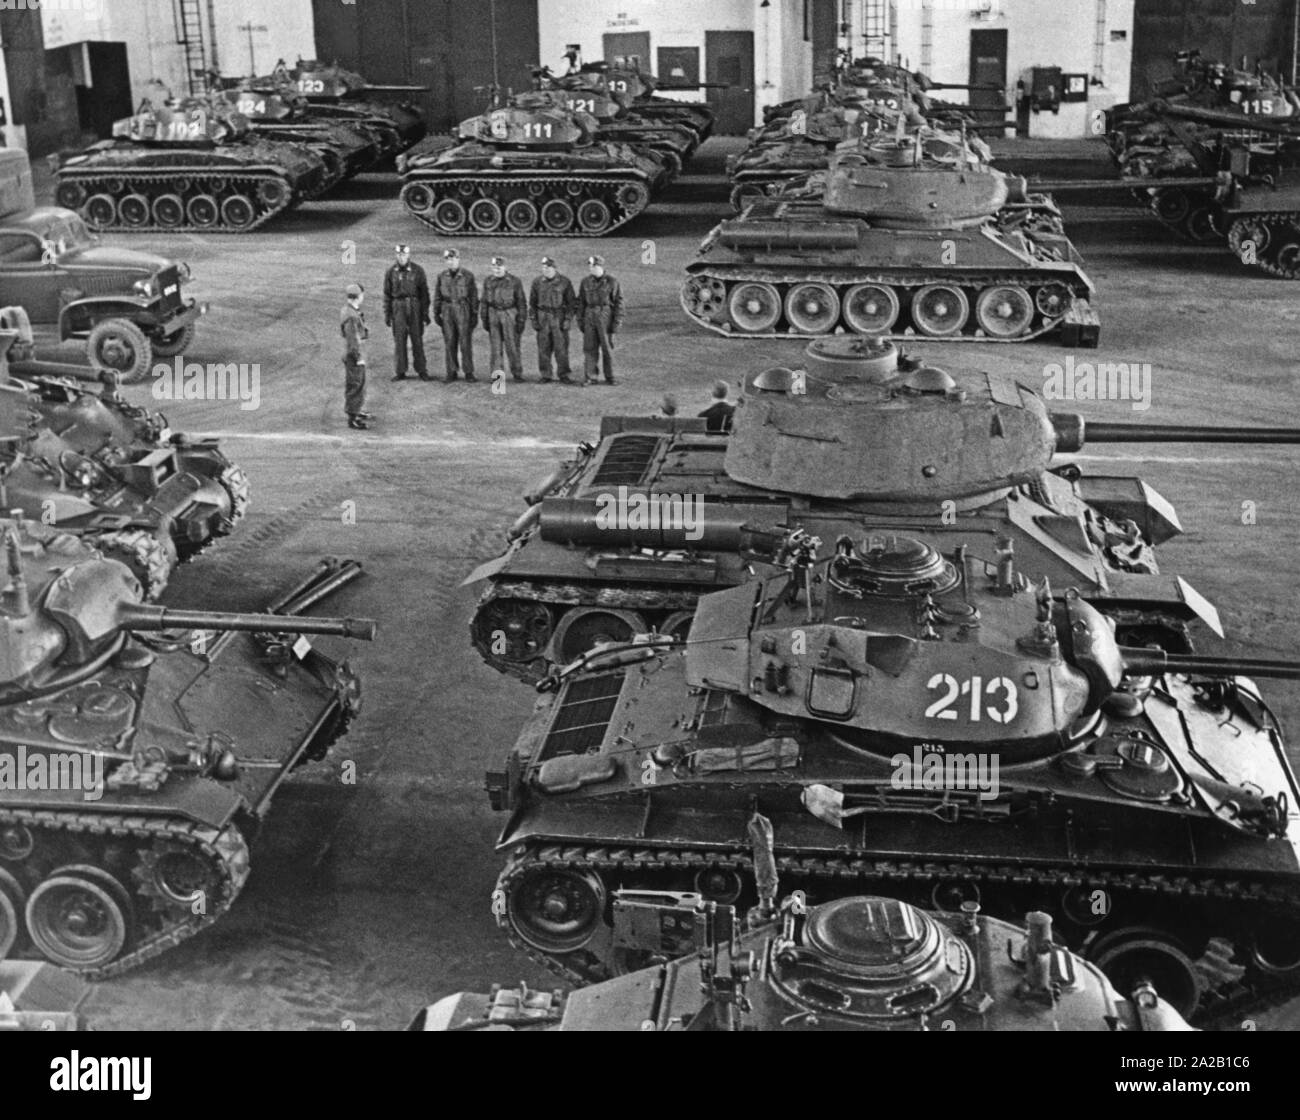 Tank in a hall of an armored unit of the newly formed Armed Forces. In the picture tanks of American and Russian origin. Undated photo, probably in the 1950s. Stock Photo